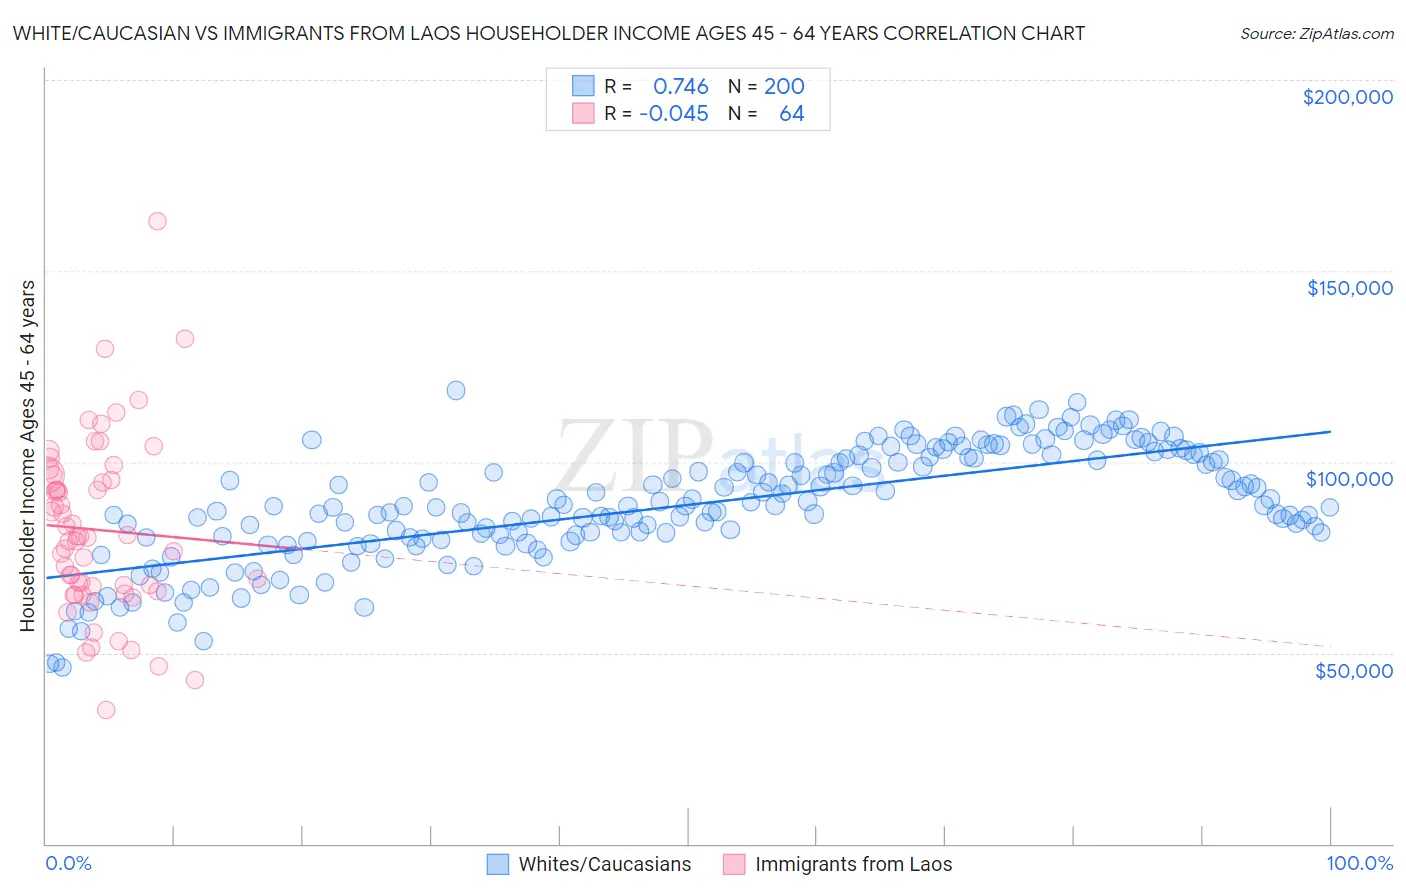 White/Caucasian vs Immigrants from Laos Householder Income Ages 45 - 64 years